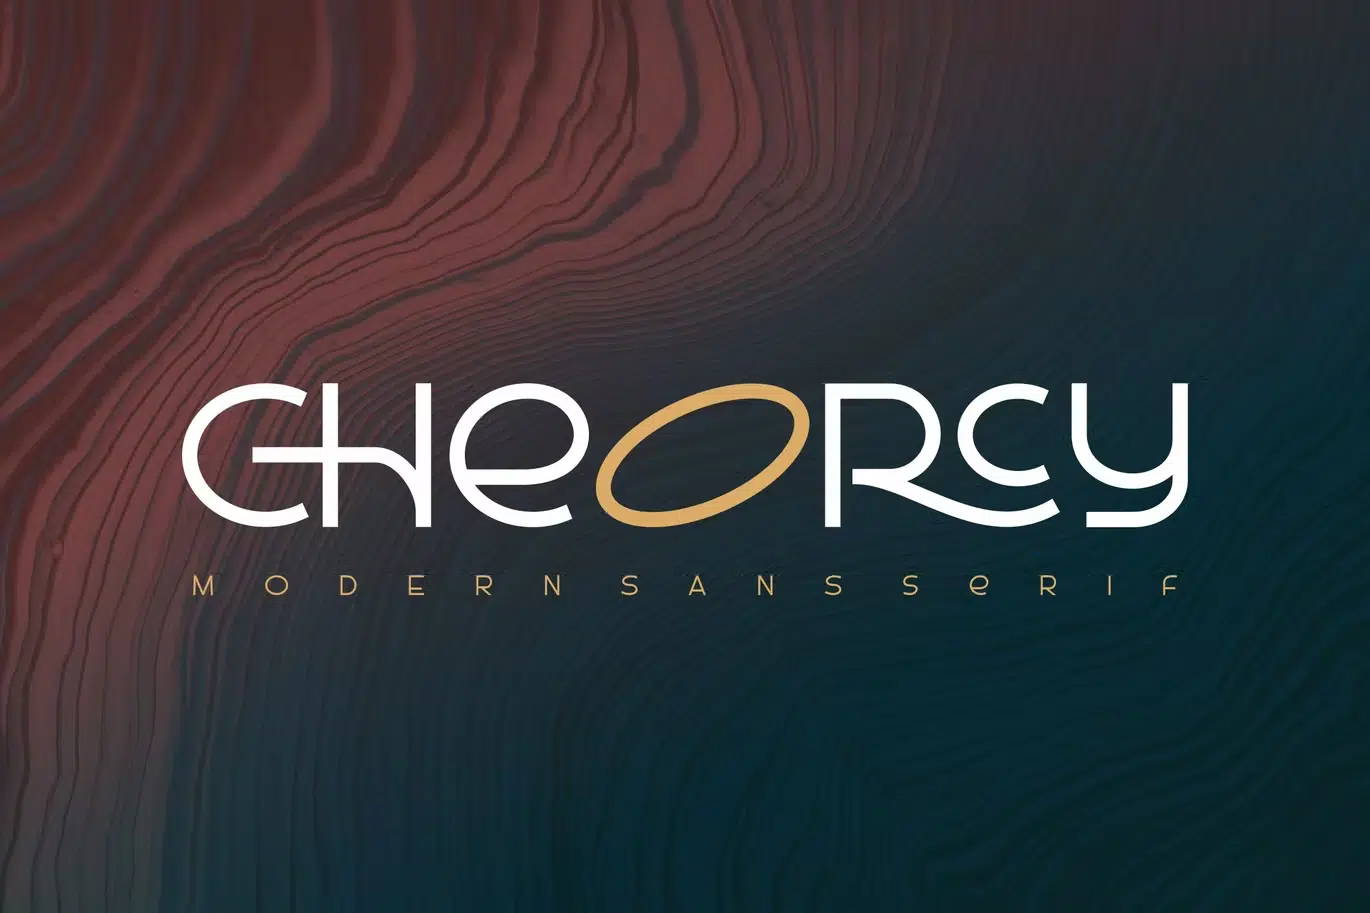 Cheorcy